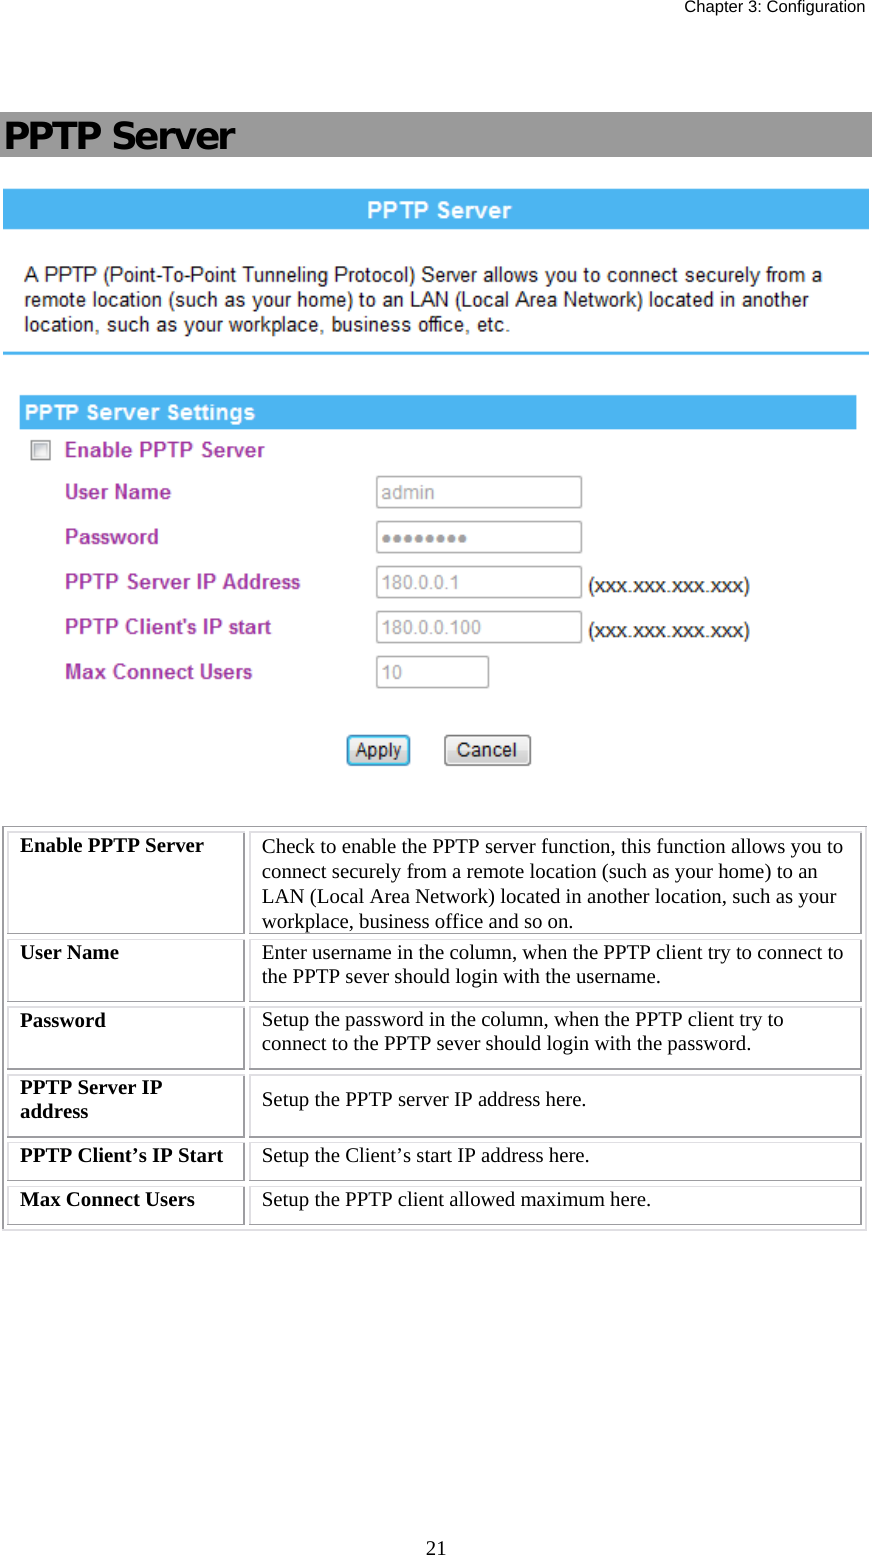   Chapter 3: Configuration  21 PPTP Server   Enable PPTP Server  Check to enable the PPTP server function, this function allows you to connect securely from a remote location (such as your home) to an LAN (Local Area Network) located in another location, such as your workplace, business office and so on. User Name  Enter username in the column, when the PPTP client try to connect to the PPTP sever should login with the username. Password  Setup the password in the column, when the PPTP client try to connect to the PPTP sever should login with the password. PPTP Server IP address  Setup the PPTP server IP address here. PPTP Client’s IP Start  Setup the Client’s start IP address here. Max Connect Users  Setup the PPTP client allowed maximum here. 